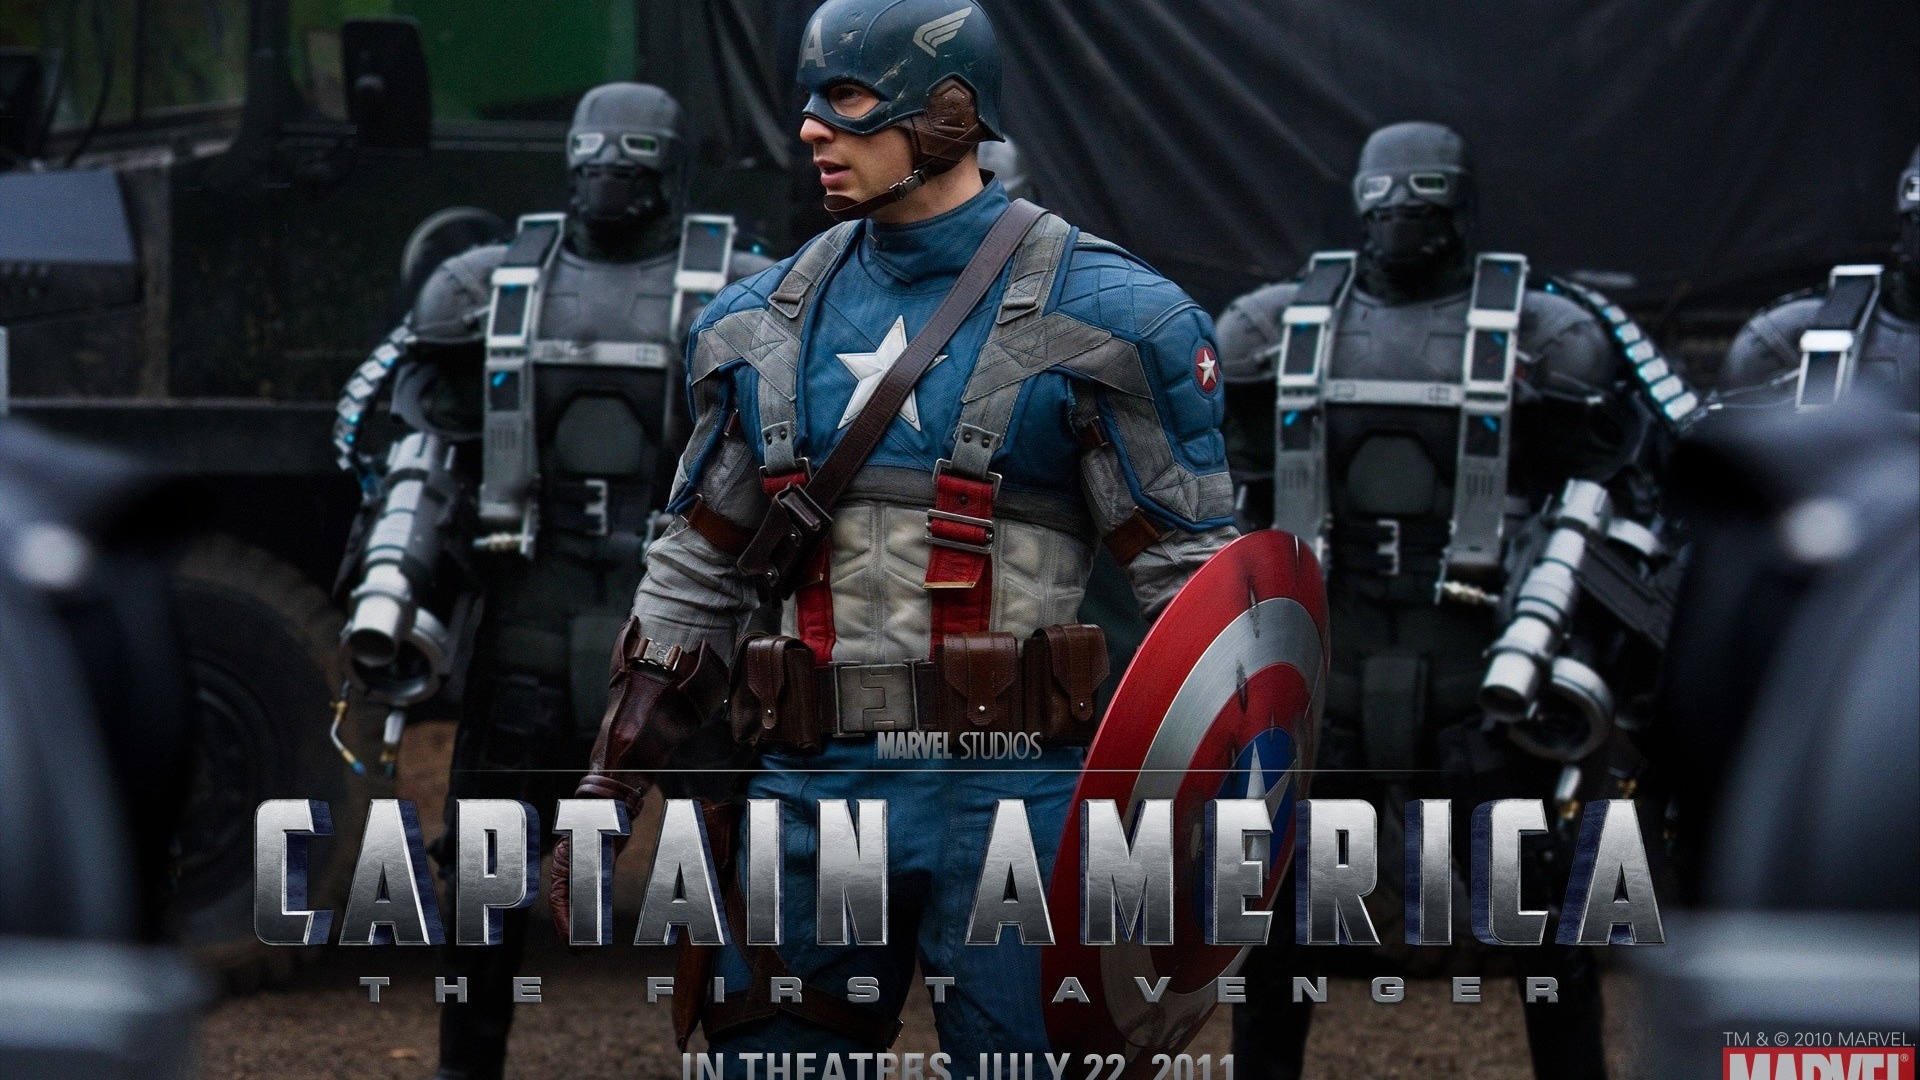 Captain America: The First Avenger wallpapers HD #21 - 1920x1080